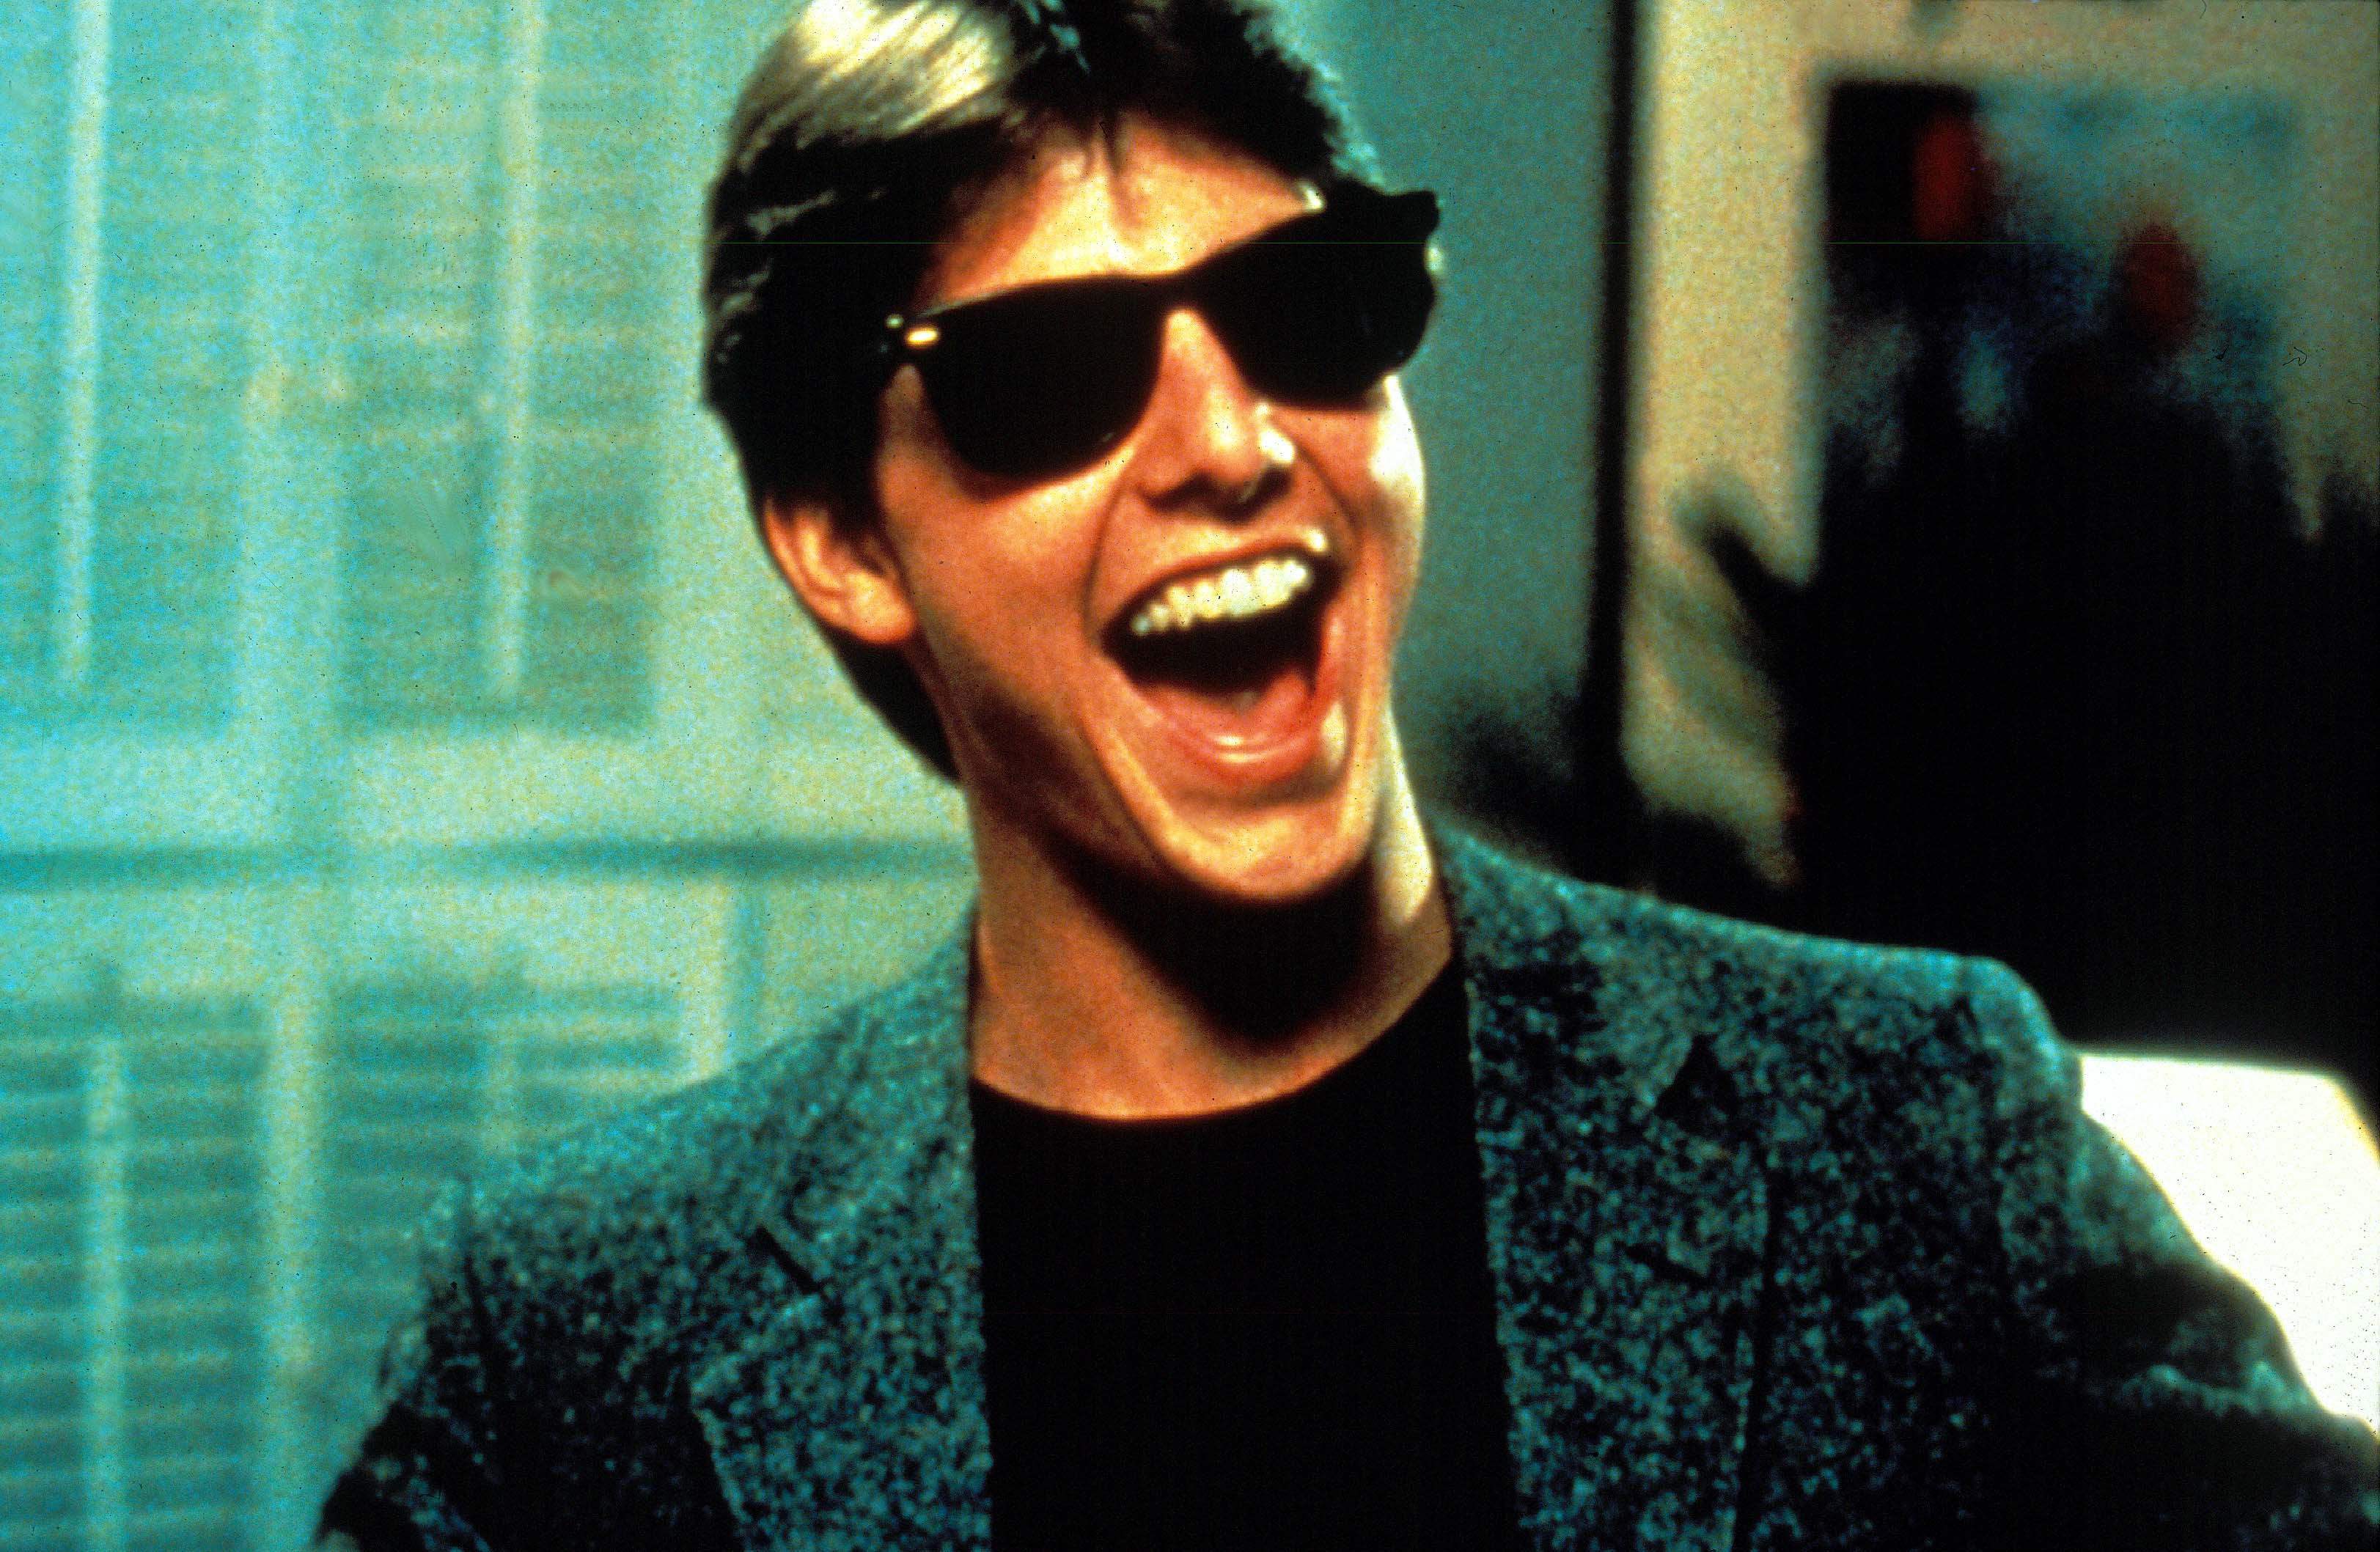 Tom Cruise wearing sunglasses and smiling in Risky Business